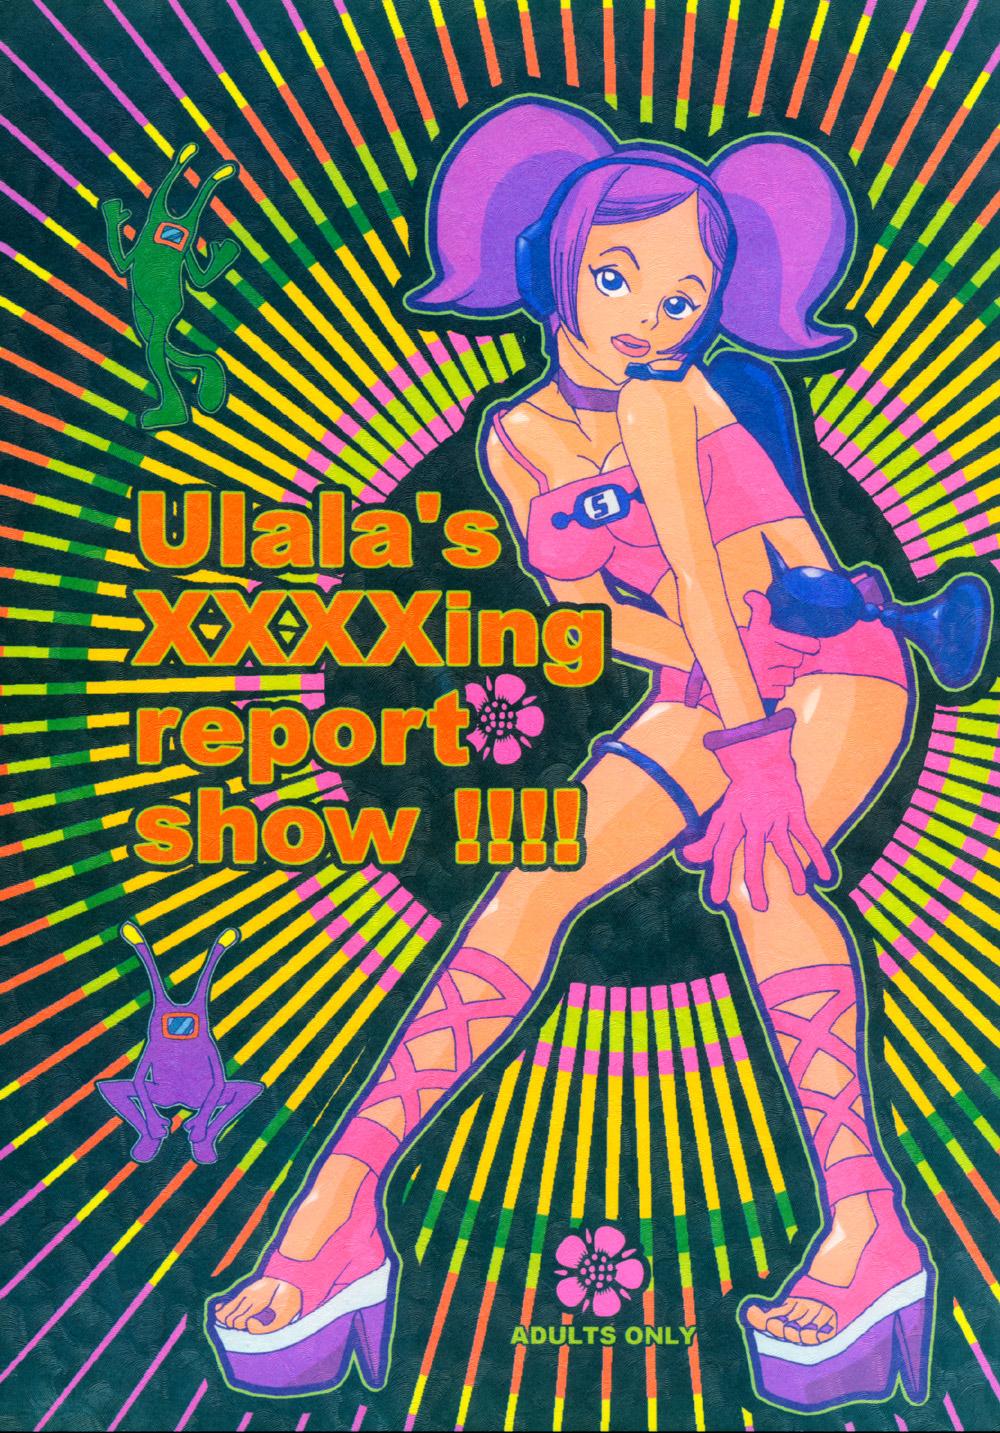 Branquinha Ulala's XXXXing Report Show!!!! - Space channel 5 Letsdoeit - Picture 1